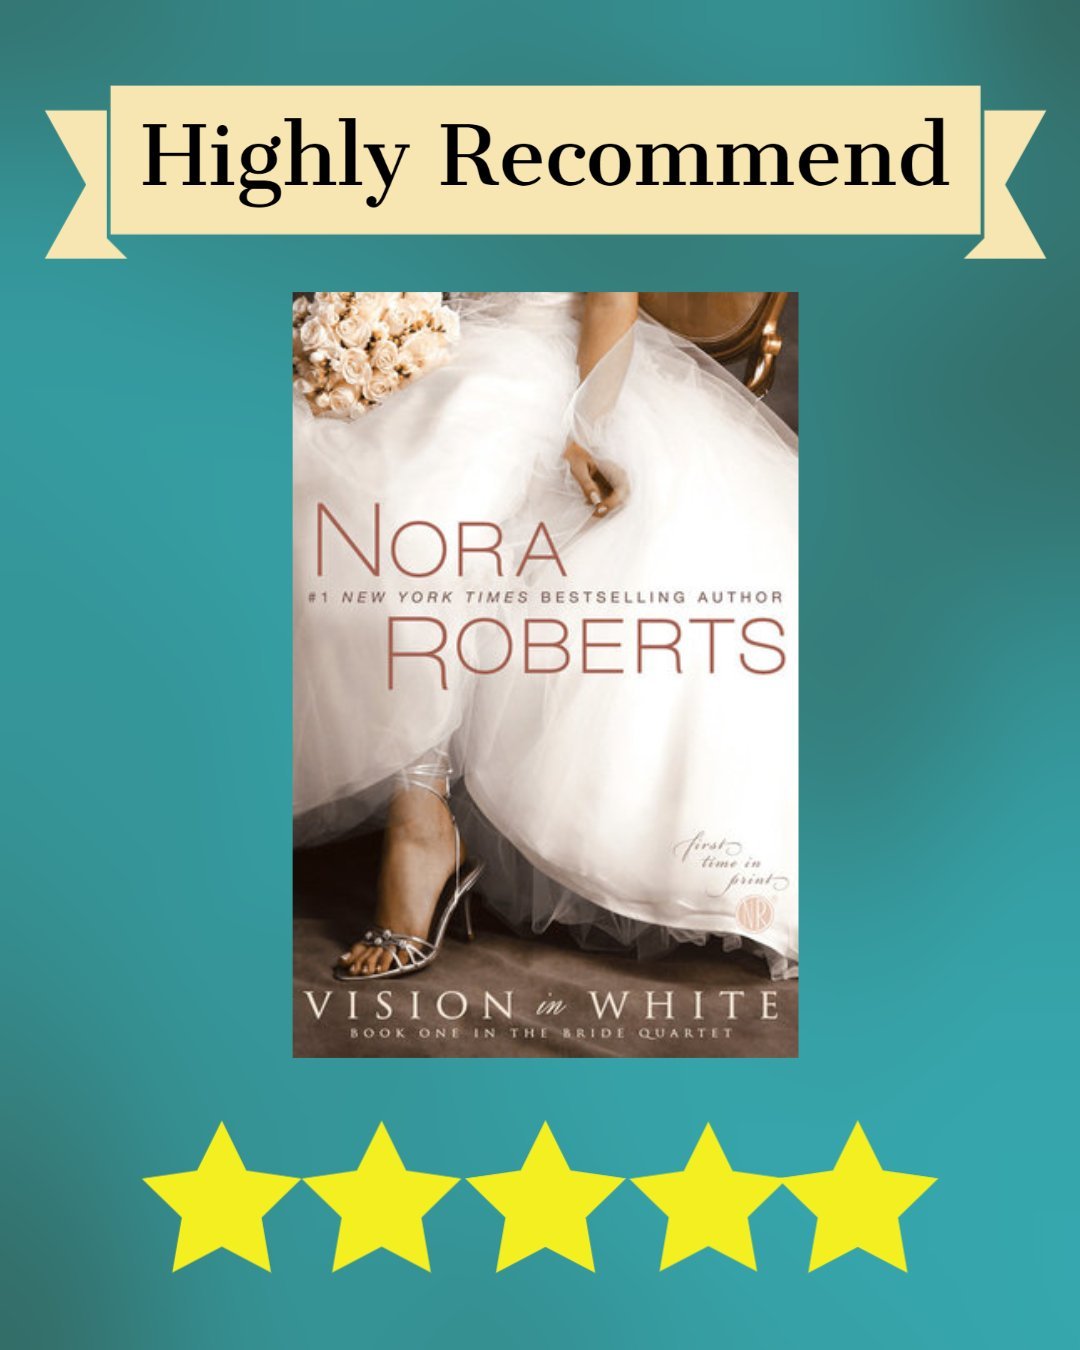 Book Review: Vision in White by Nora Roberts - B.T. Polcari